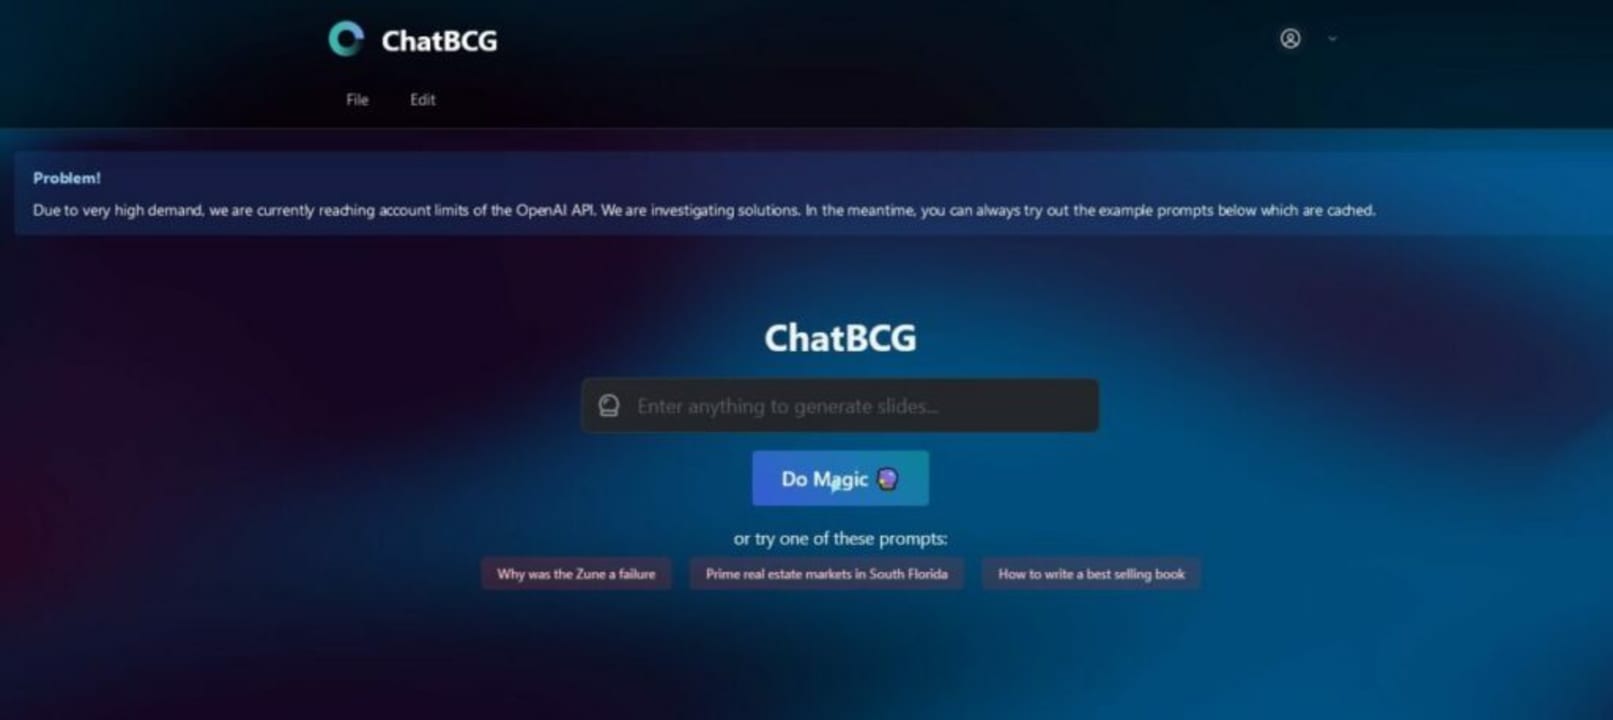 Meet CChatBCG: The world’s first Text-to-PowerPoint AI